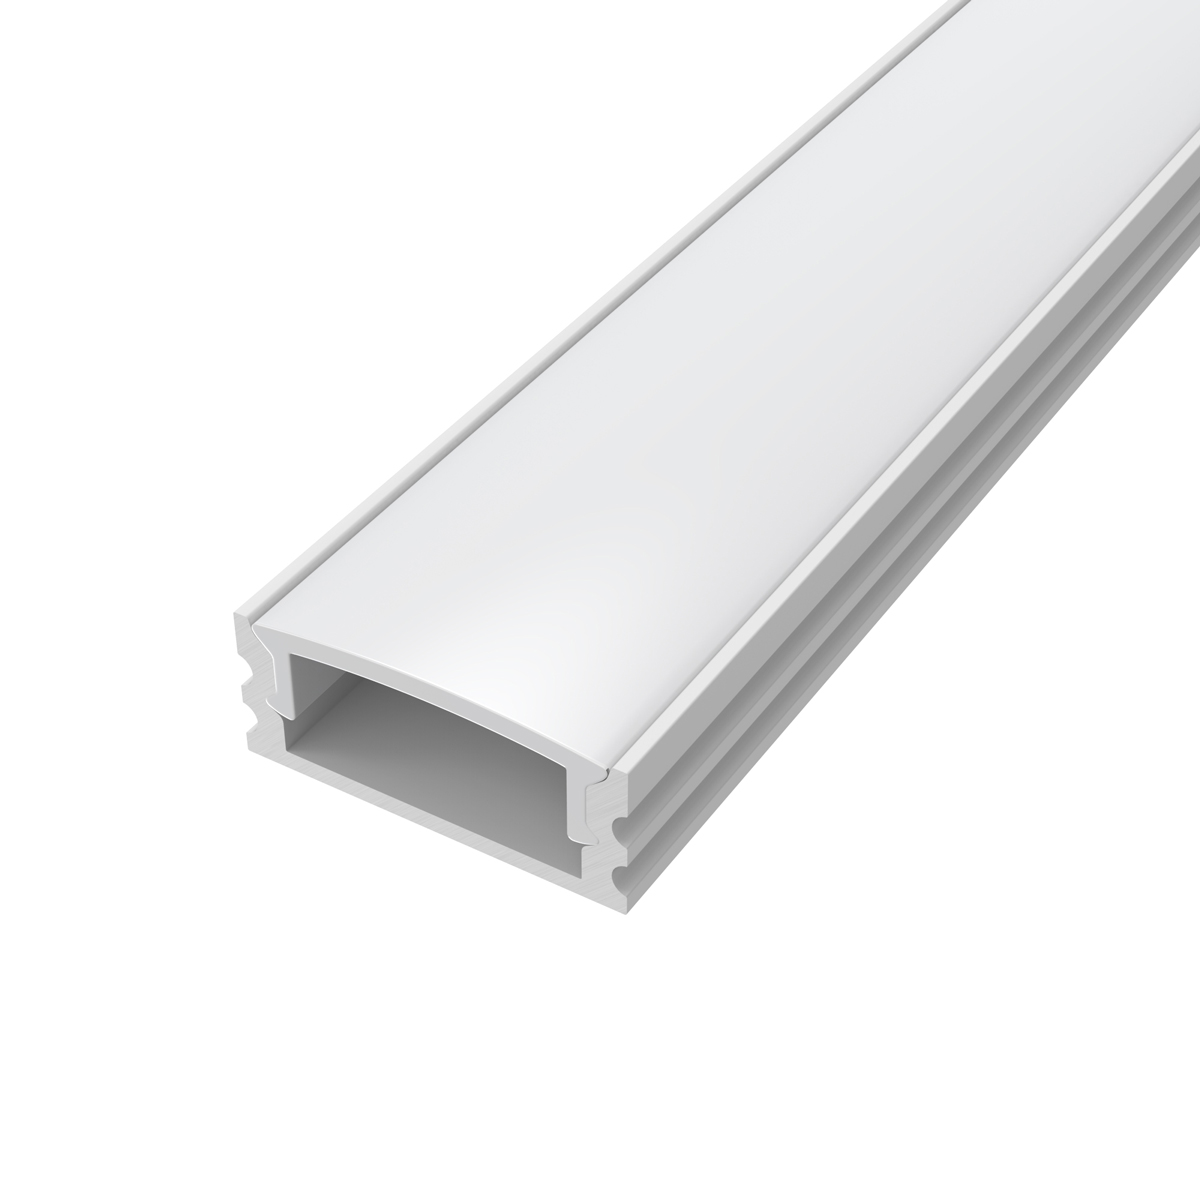 View 2m White Surface Mounted 7mm LED Profile With Frosted Cover information